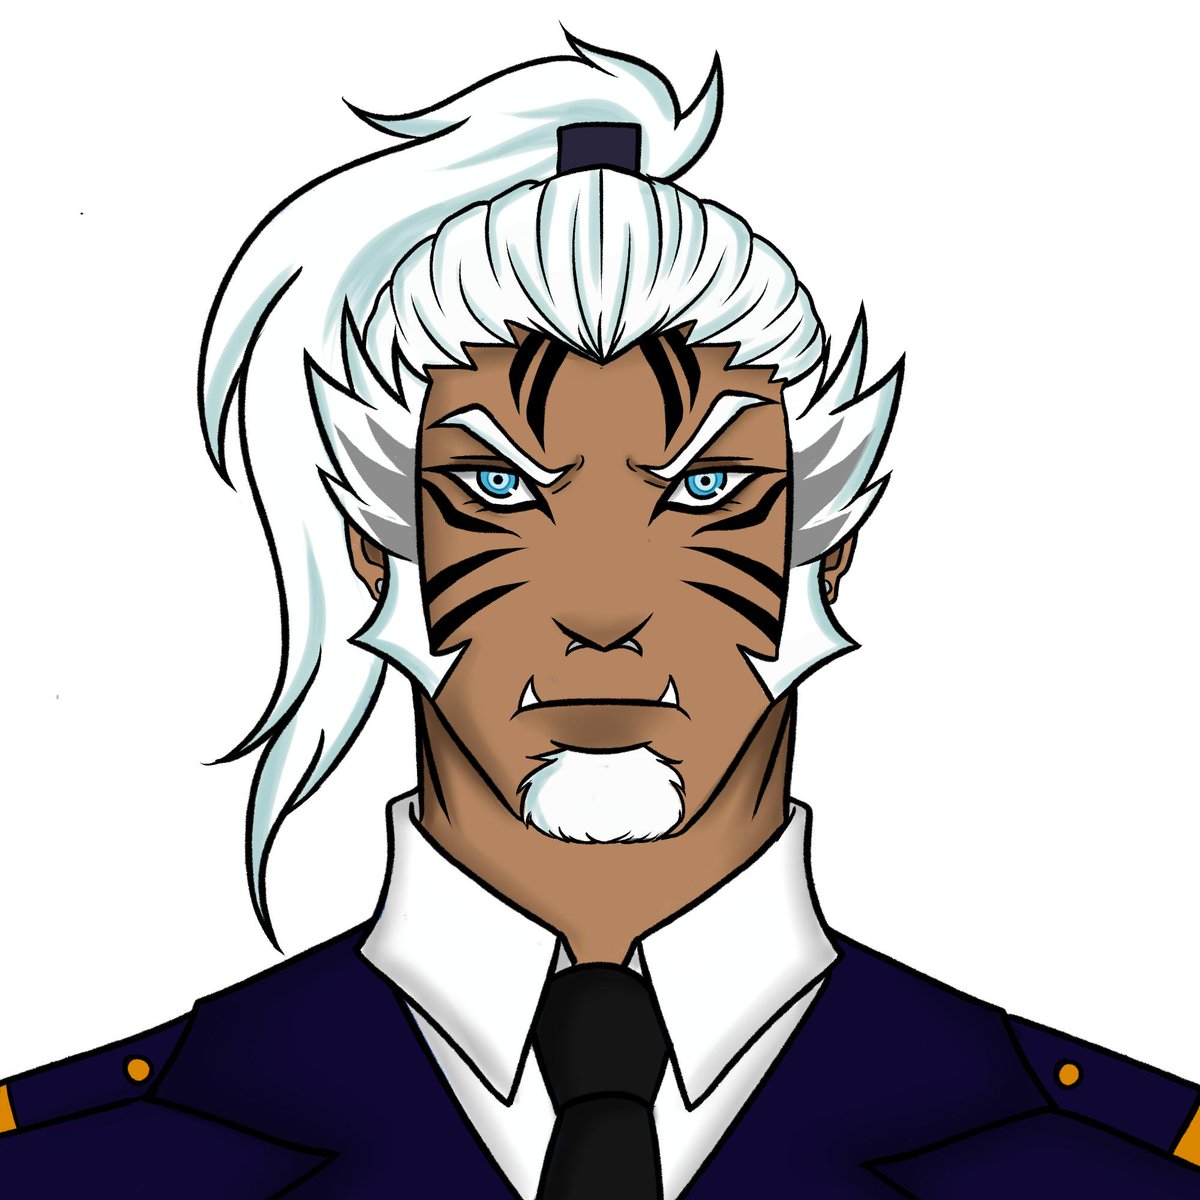 12. Baihu, BNHA OC. Used to be a popular prohero, but is now retired and works as chief of police. Stern and stubbor, but a lot softer than he looks. Flusters easily if you get him just right. Strict, but cares deeply.